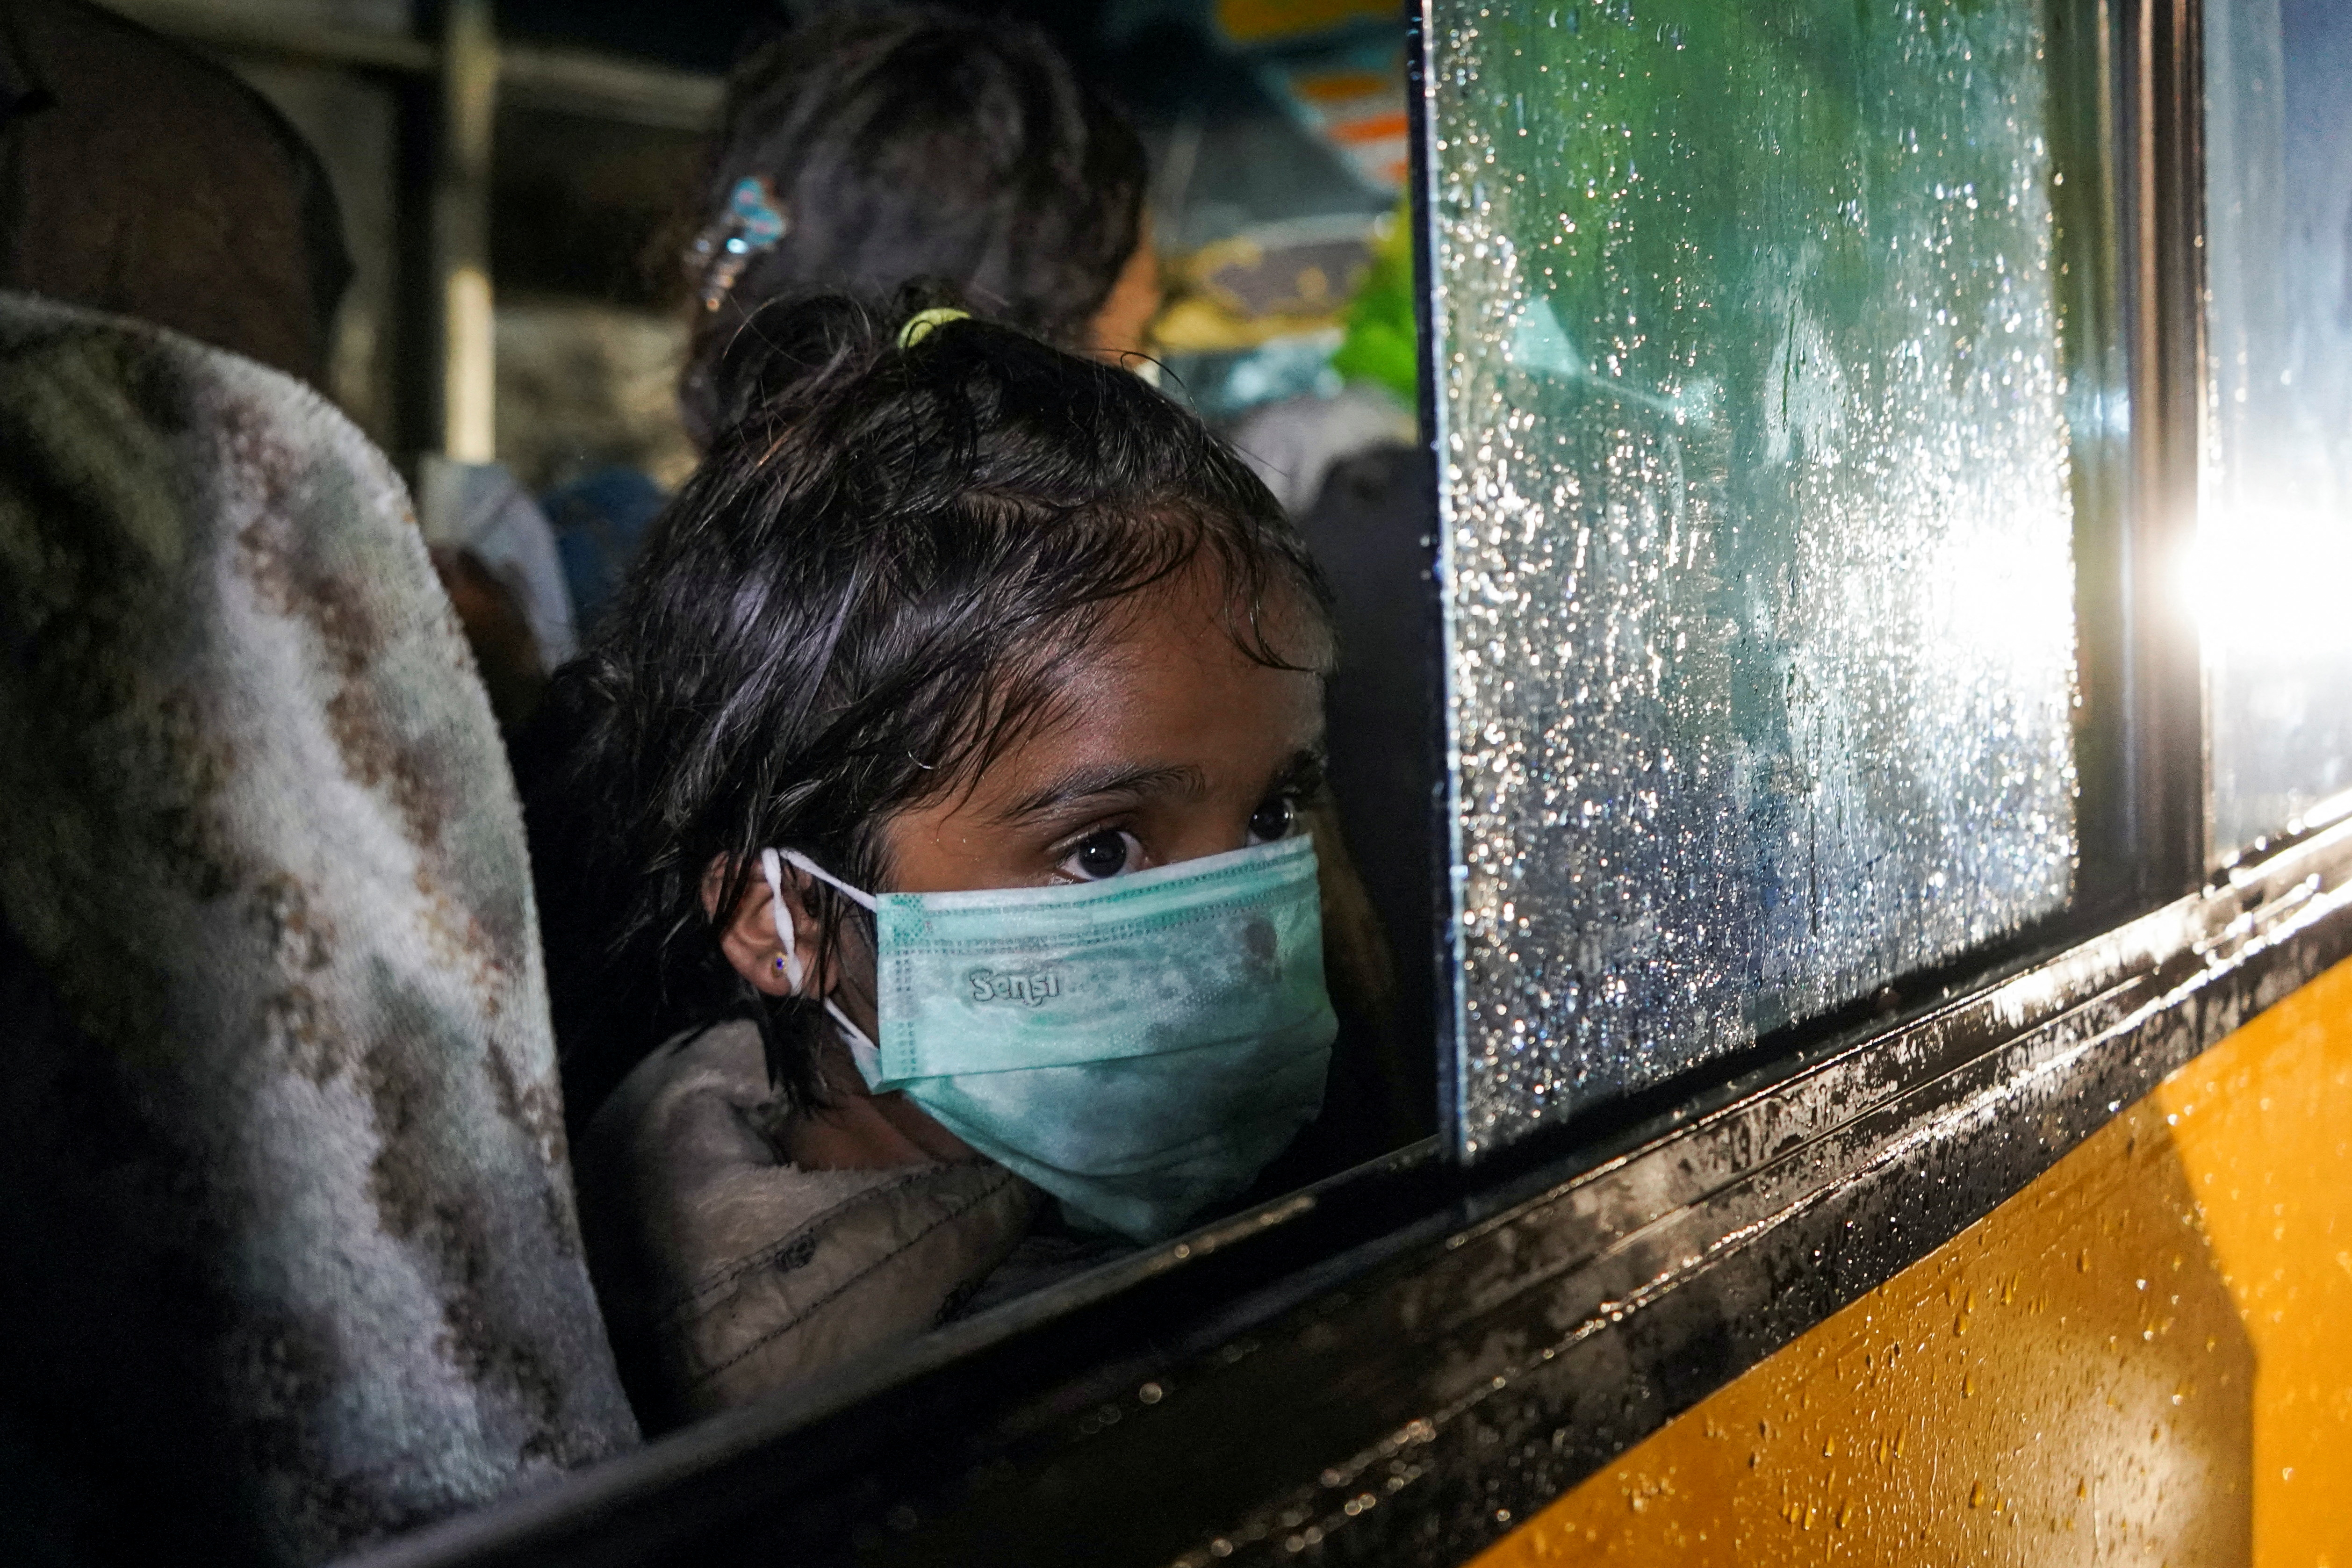 A Rohingya child looks on near a window of a bus during an evacuation after they arrive by boat at a port in Krueng Geukuh near Lhokseumawe, North Aceh